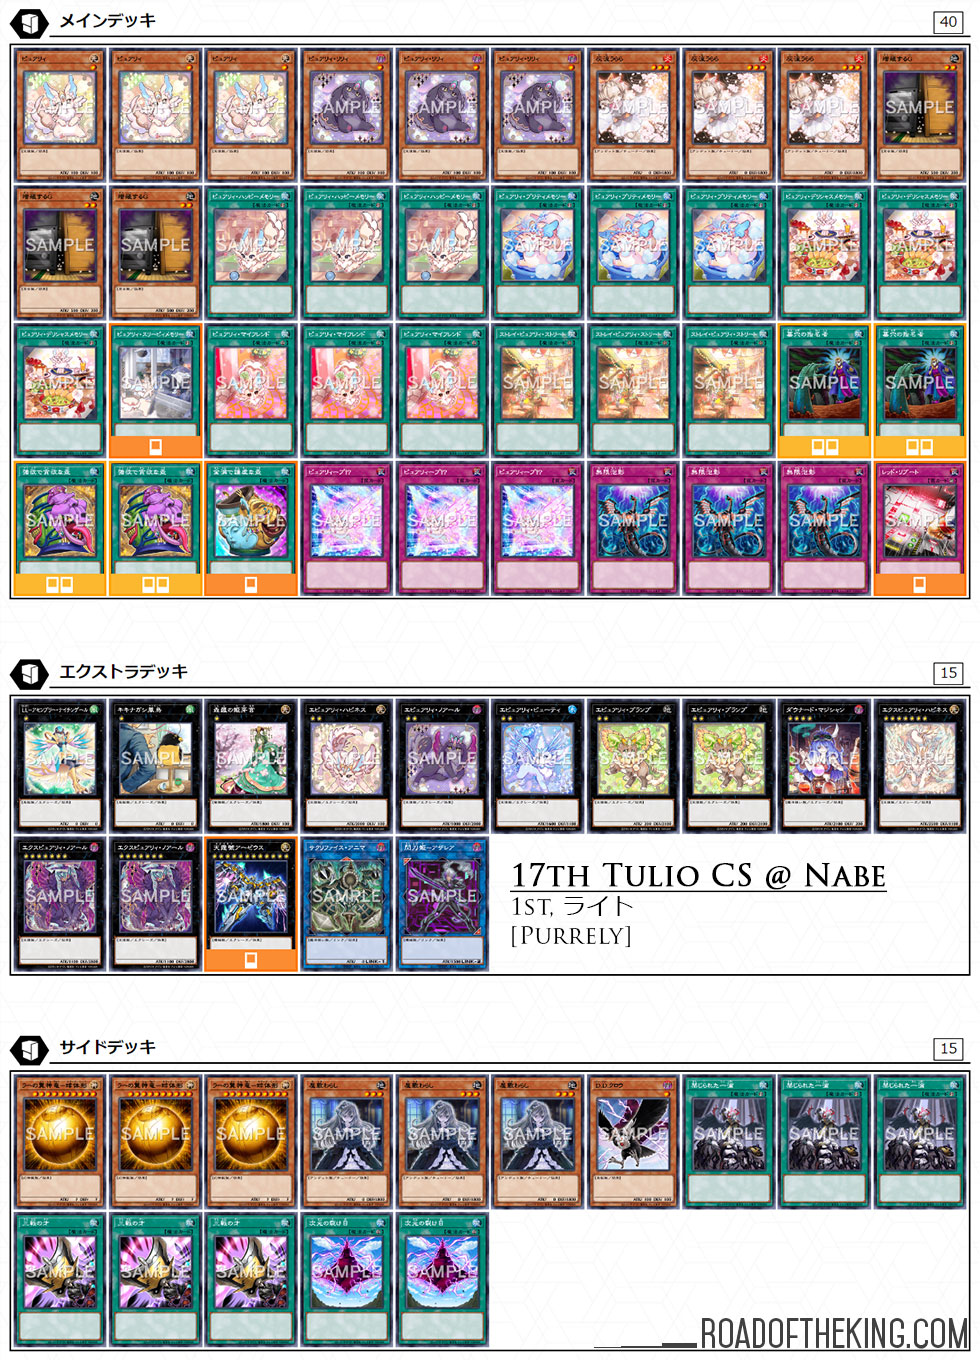 Ready for Duel - OCG 2021.07 Metagame Report #6 Source